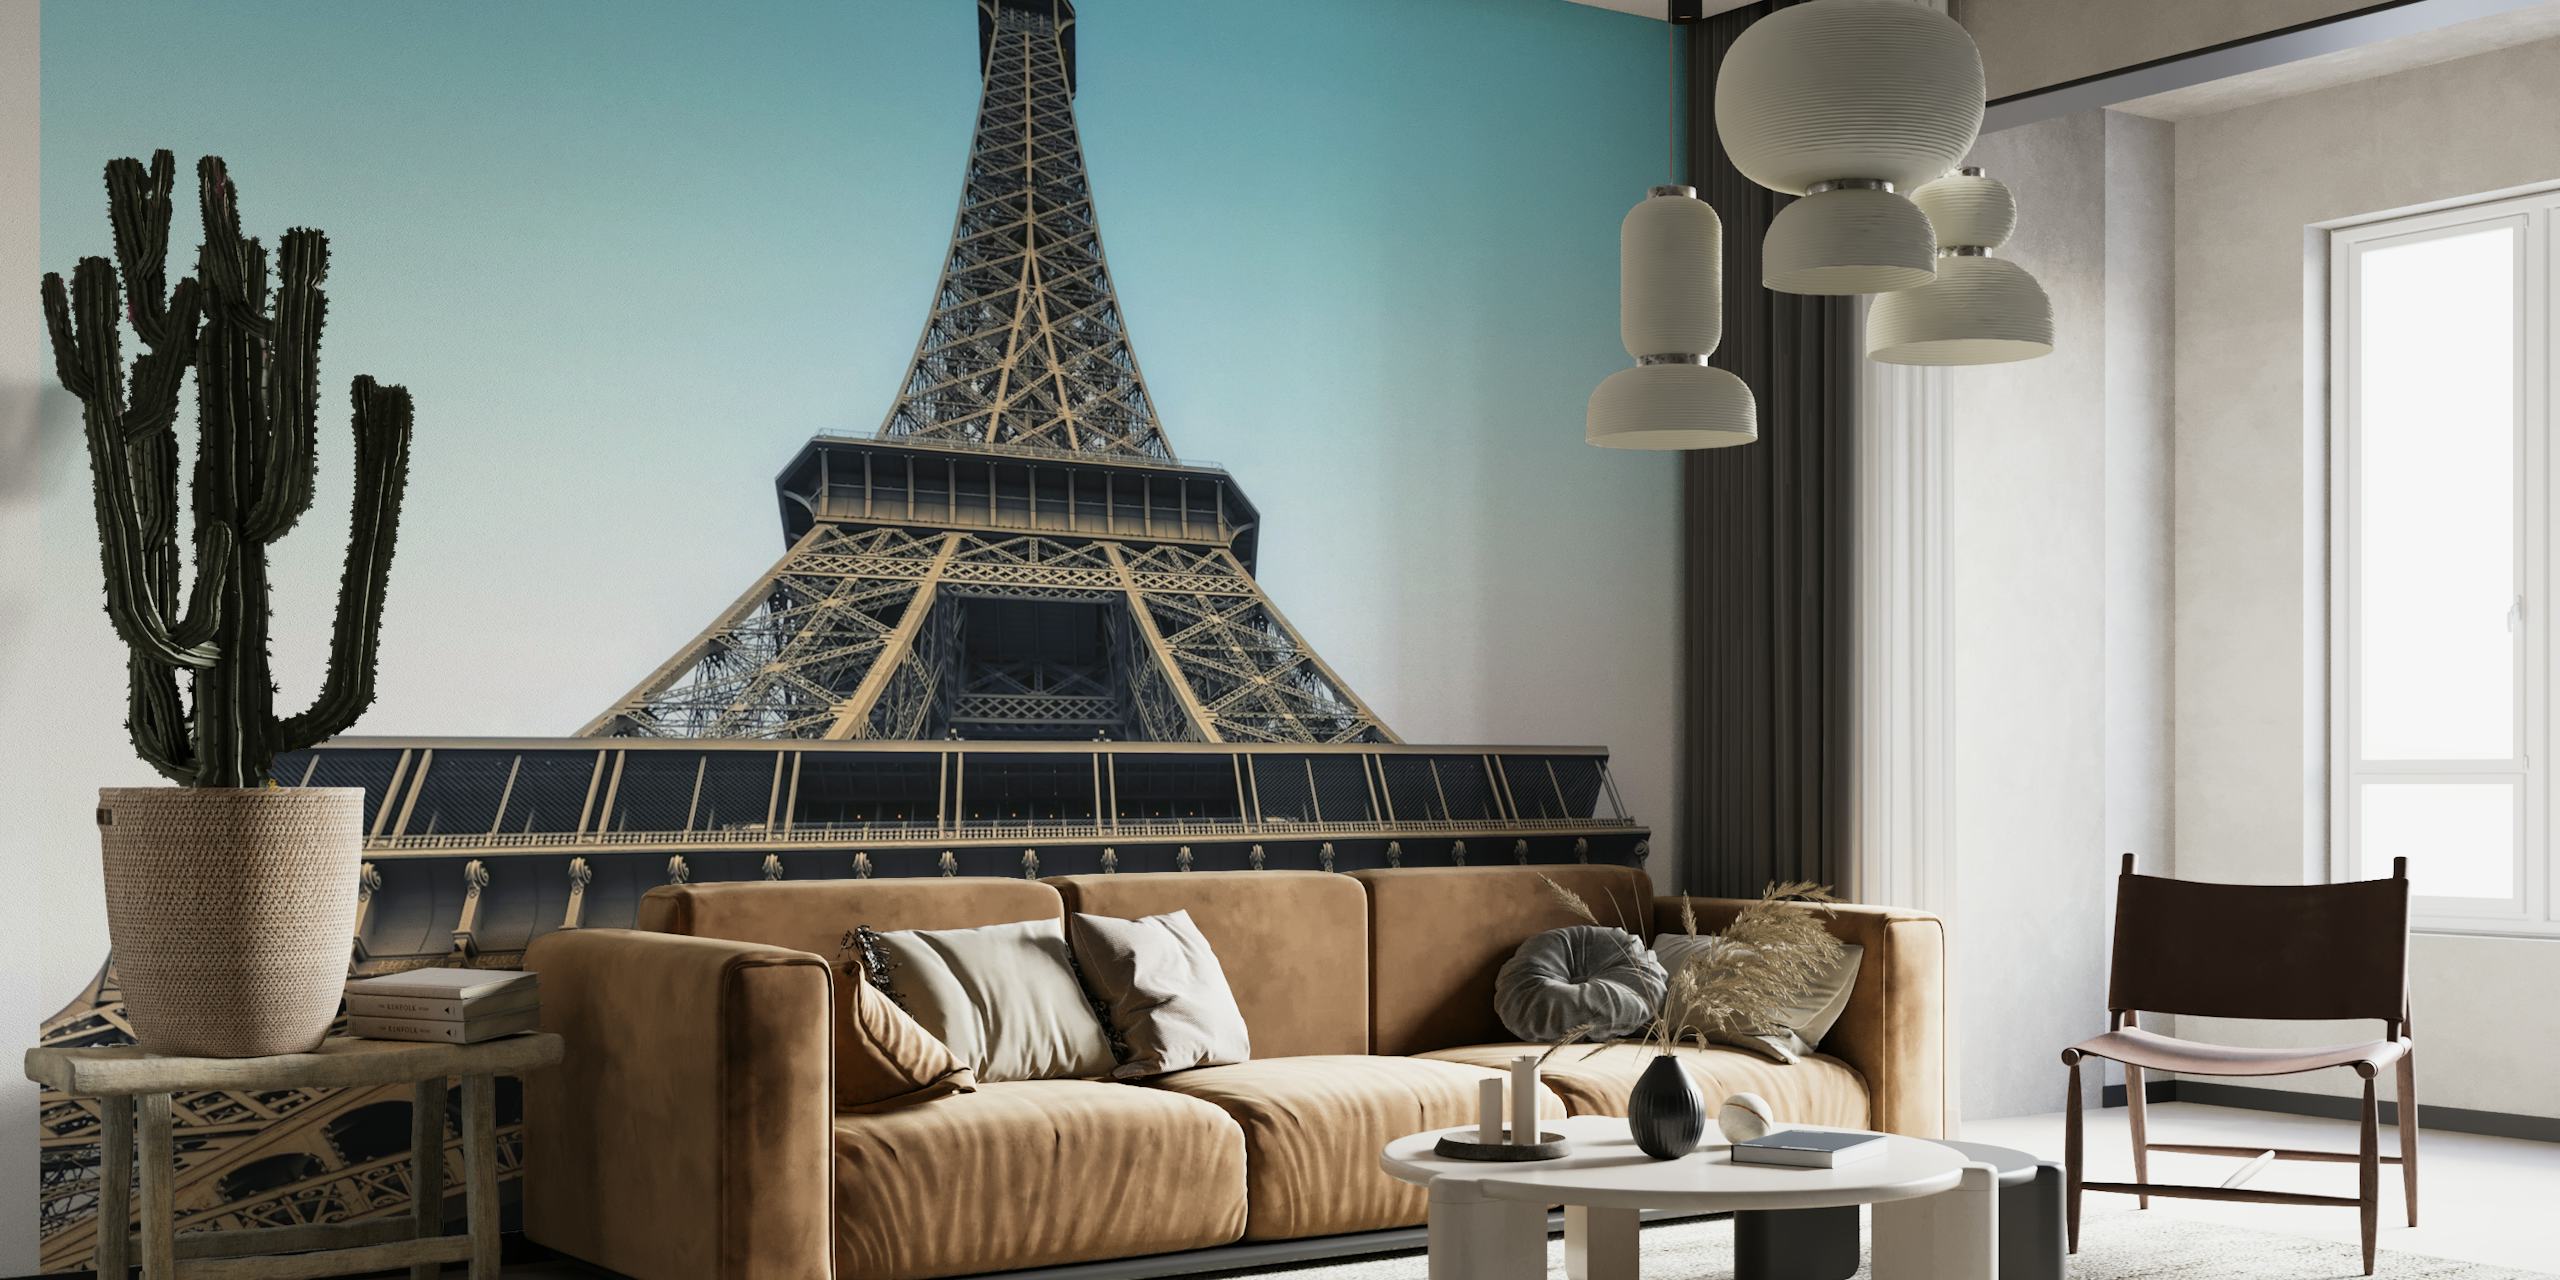 Eiffel Tower wall mural with clear blue skies